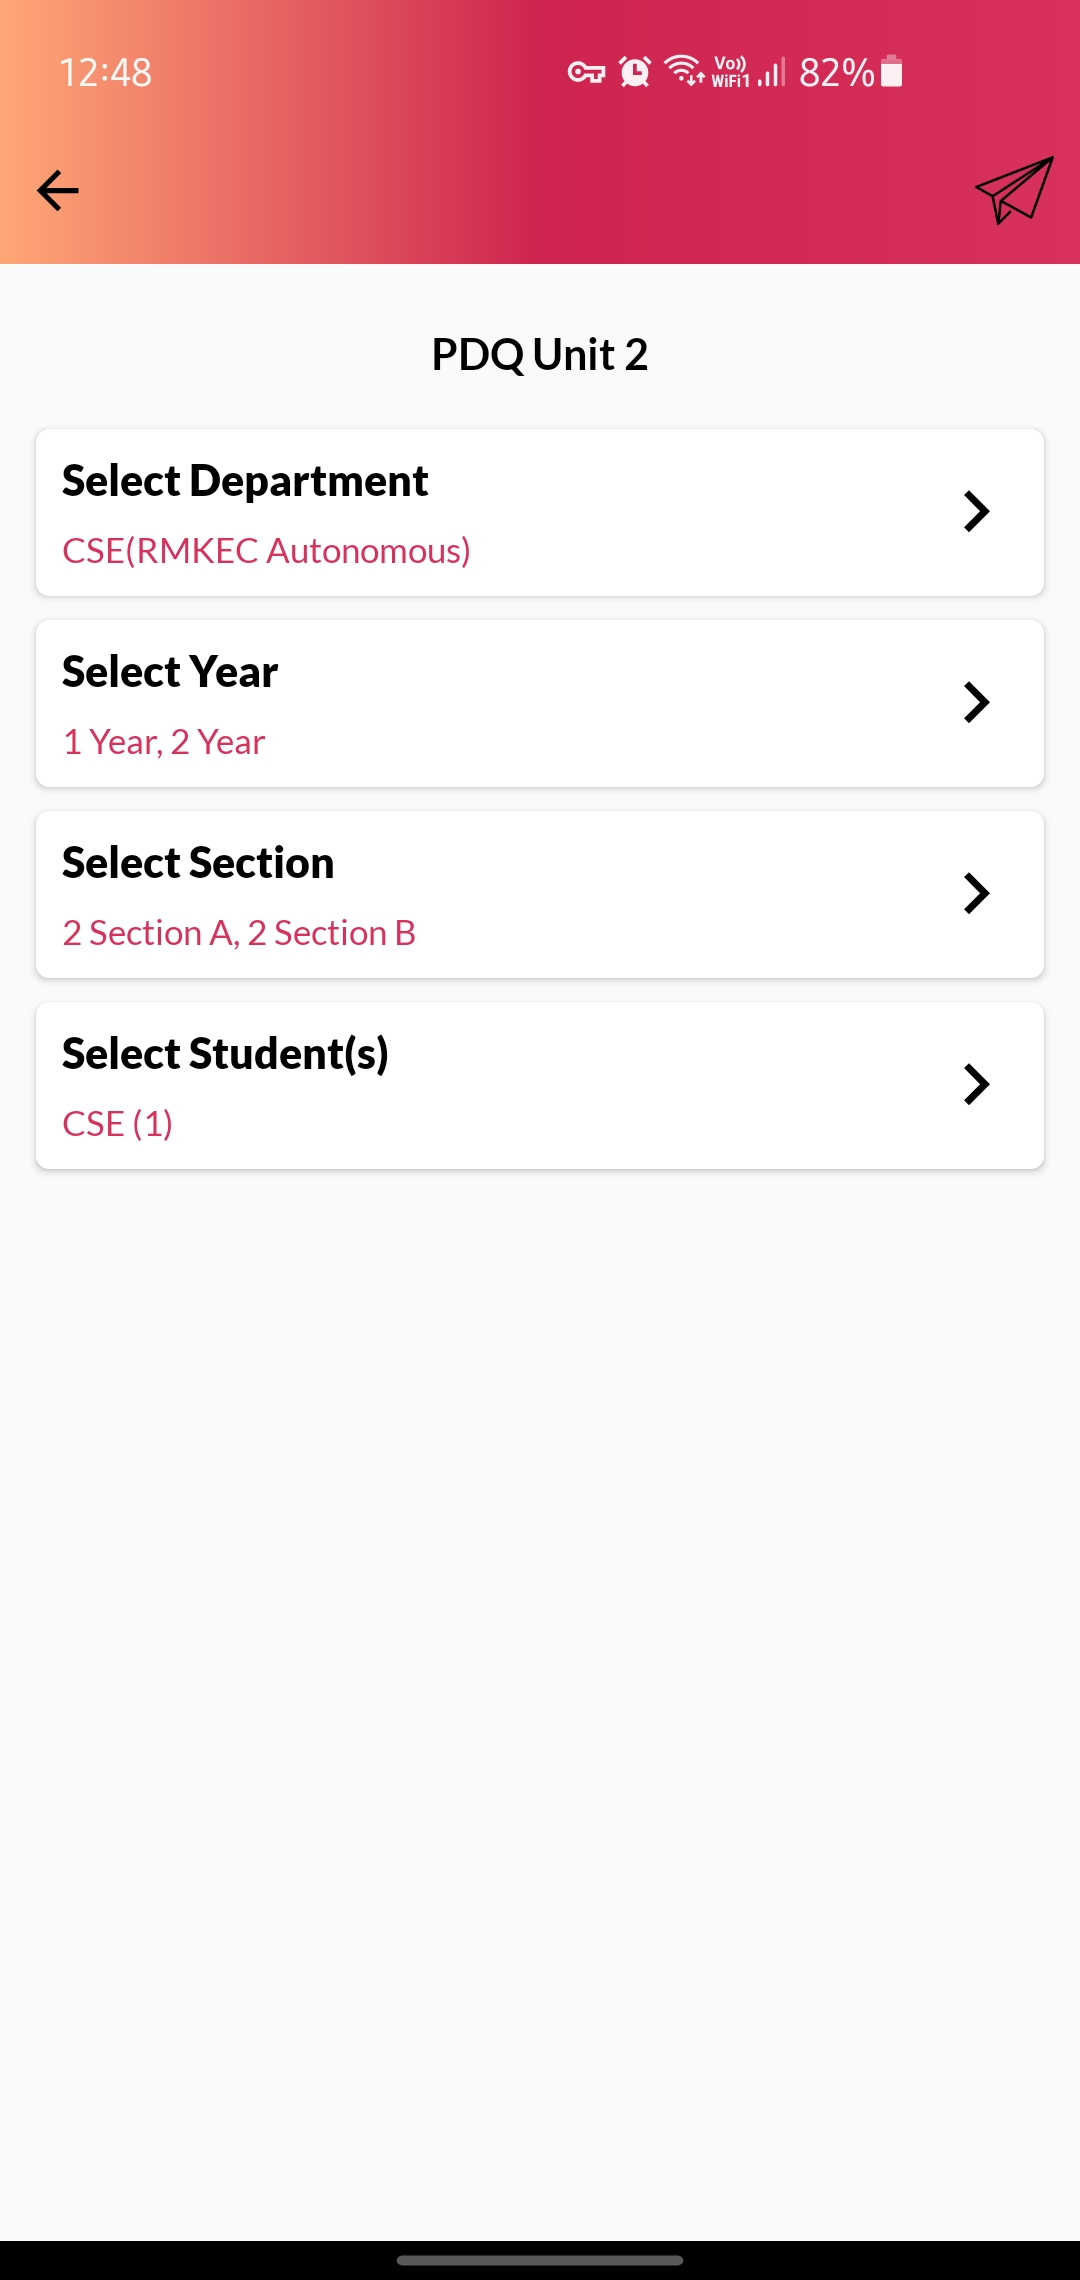 6. tap on the Send icon on the top right corner to send the Course Content to students.